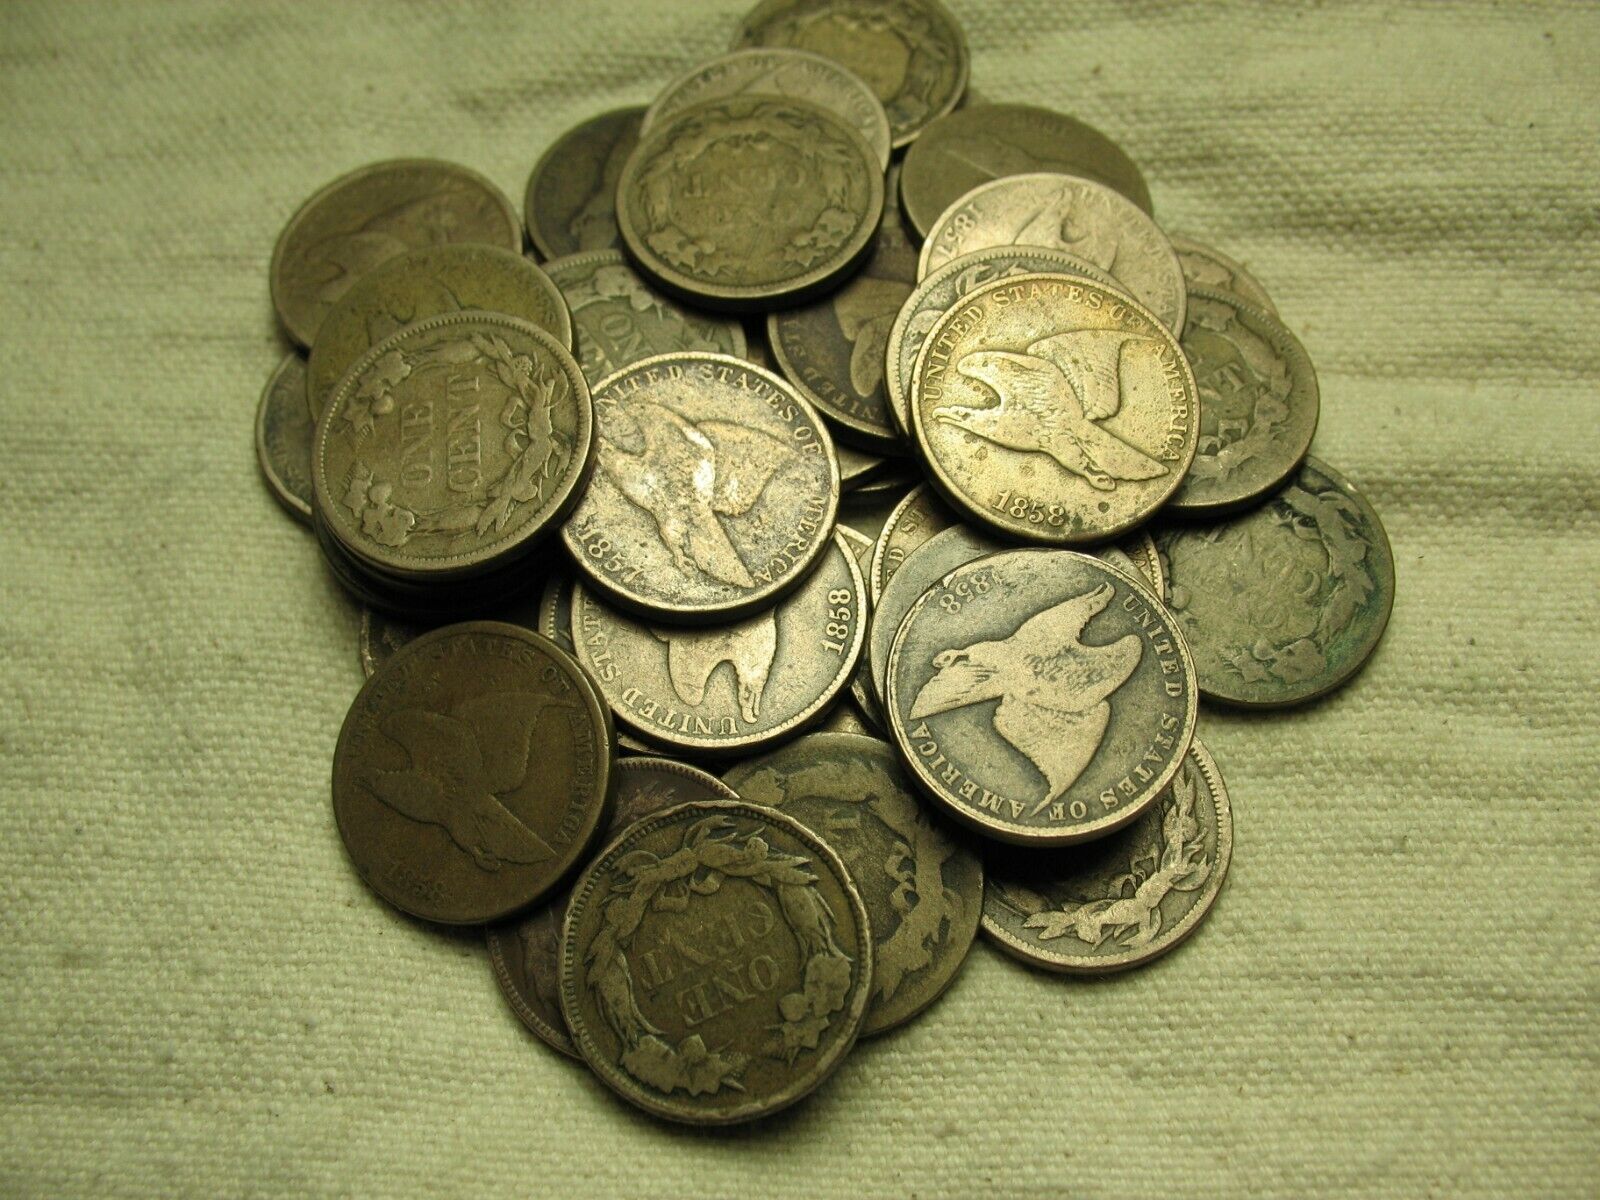 U.S. FLYING EAGLE CENT LOT 1 COIN PER WINNING BID *MAKE AN OFFER* OLD COIN LOT